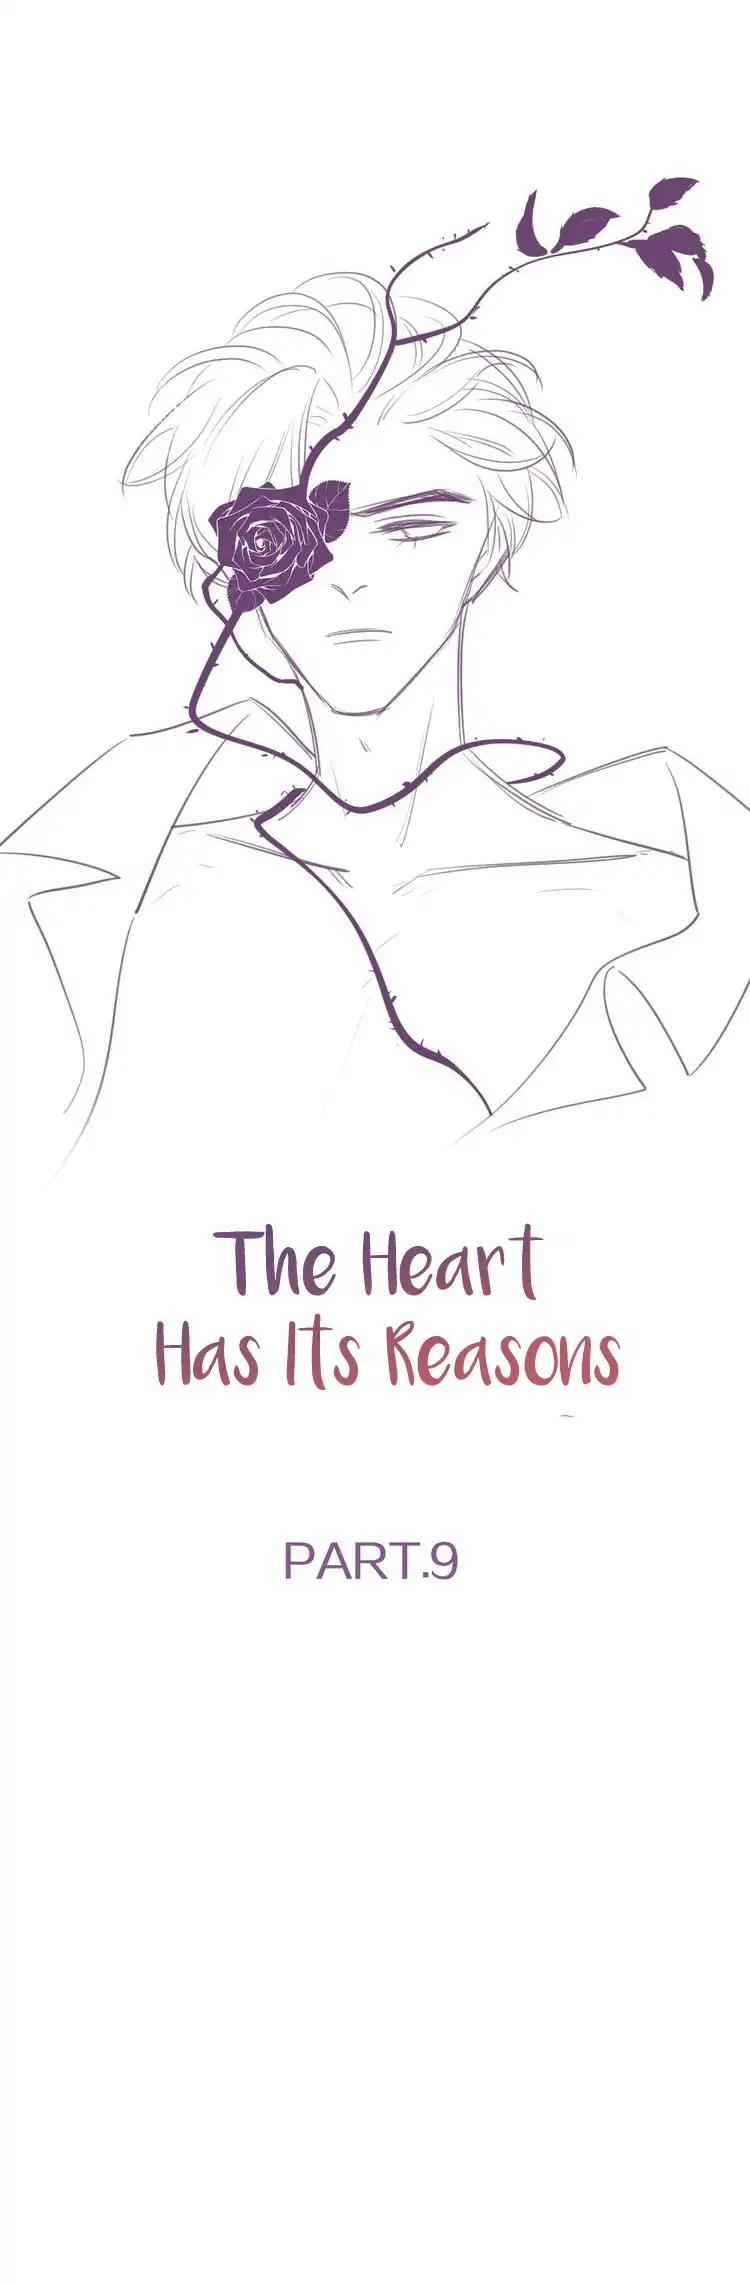 The Looks of Love: The Heart Has Its Reasons Chapter 9: